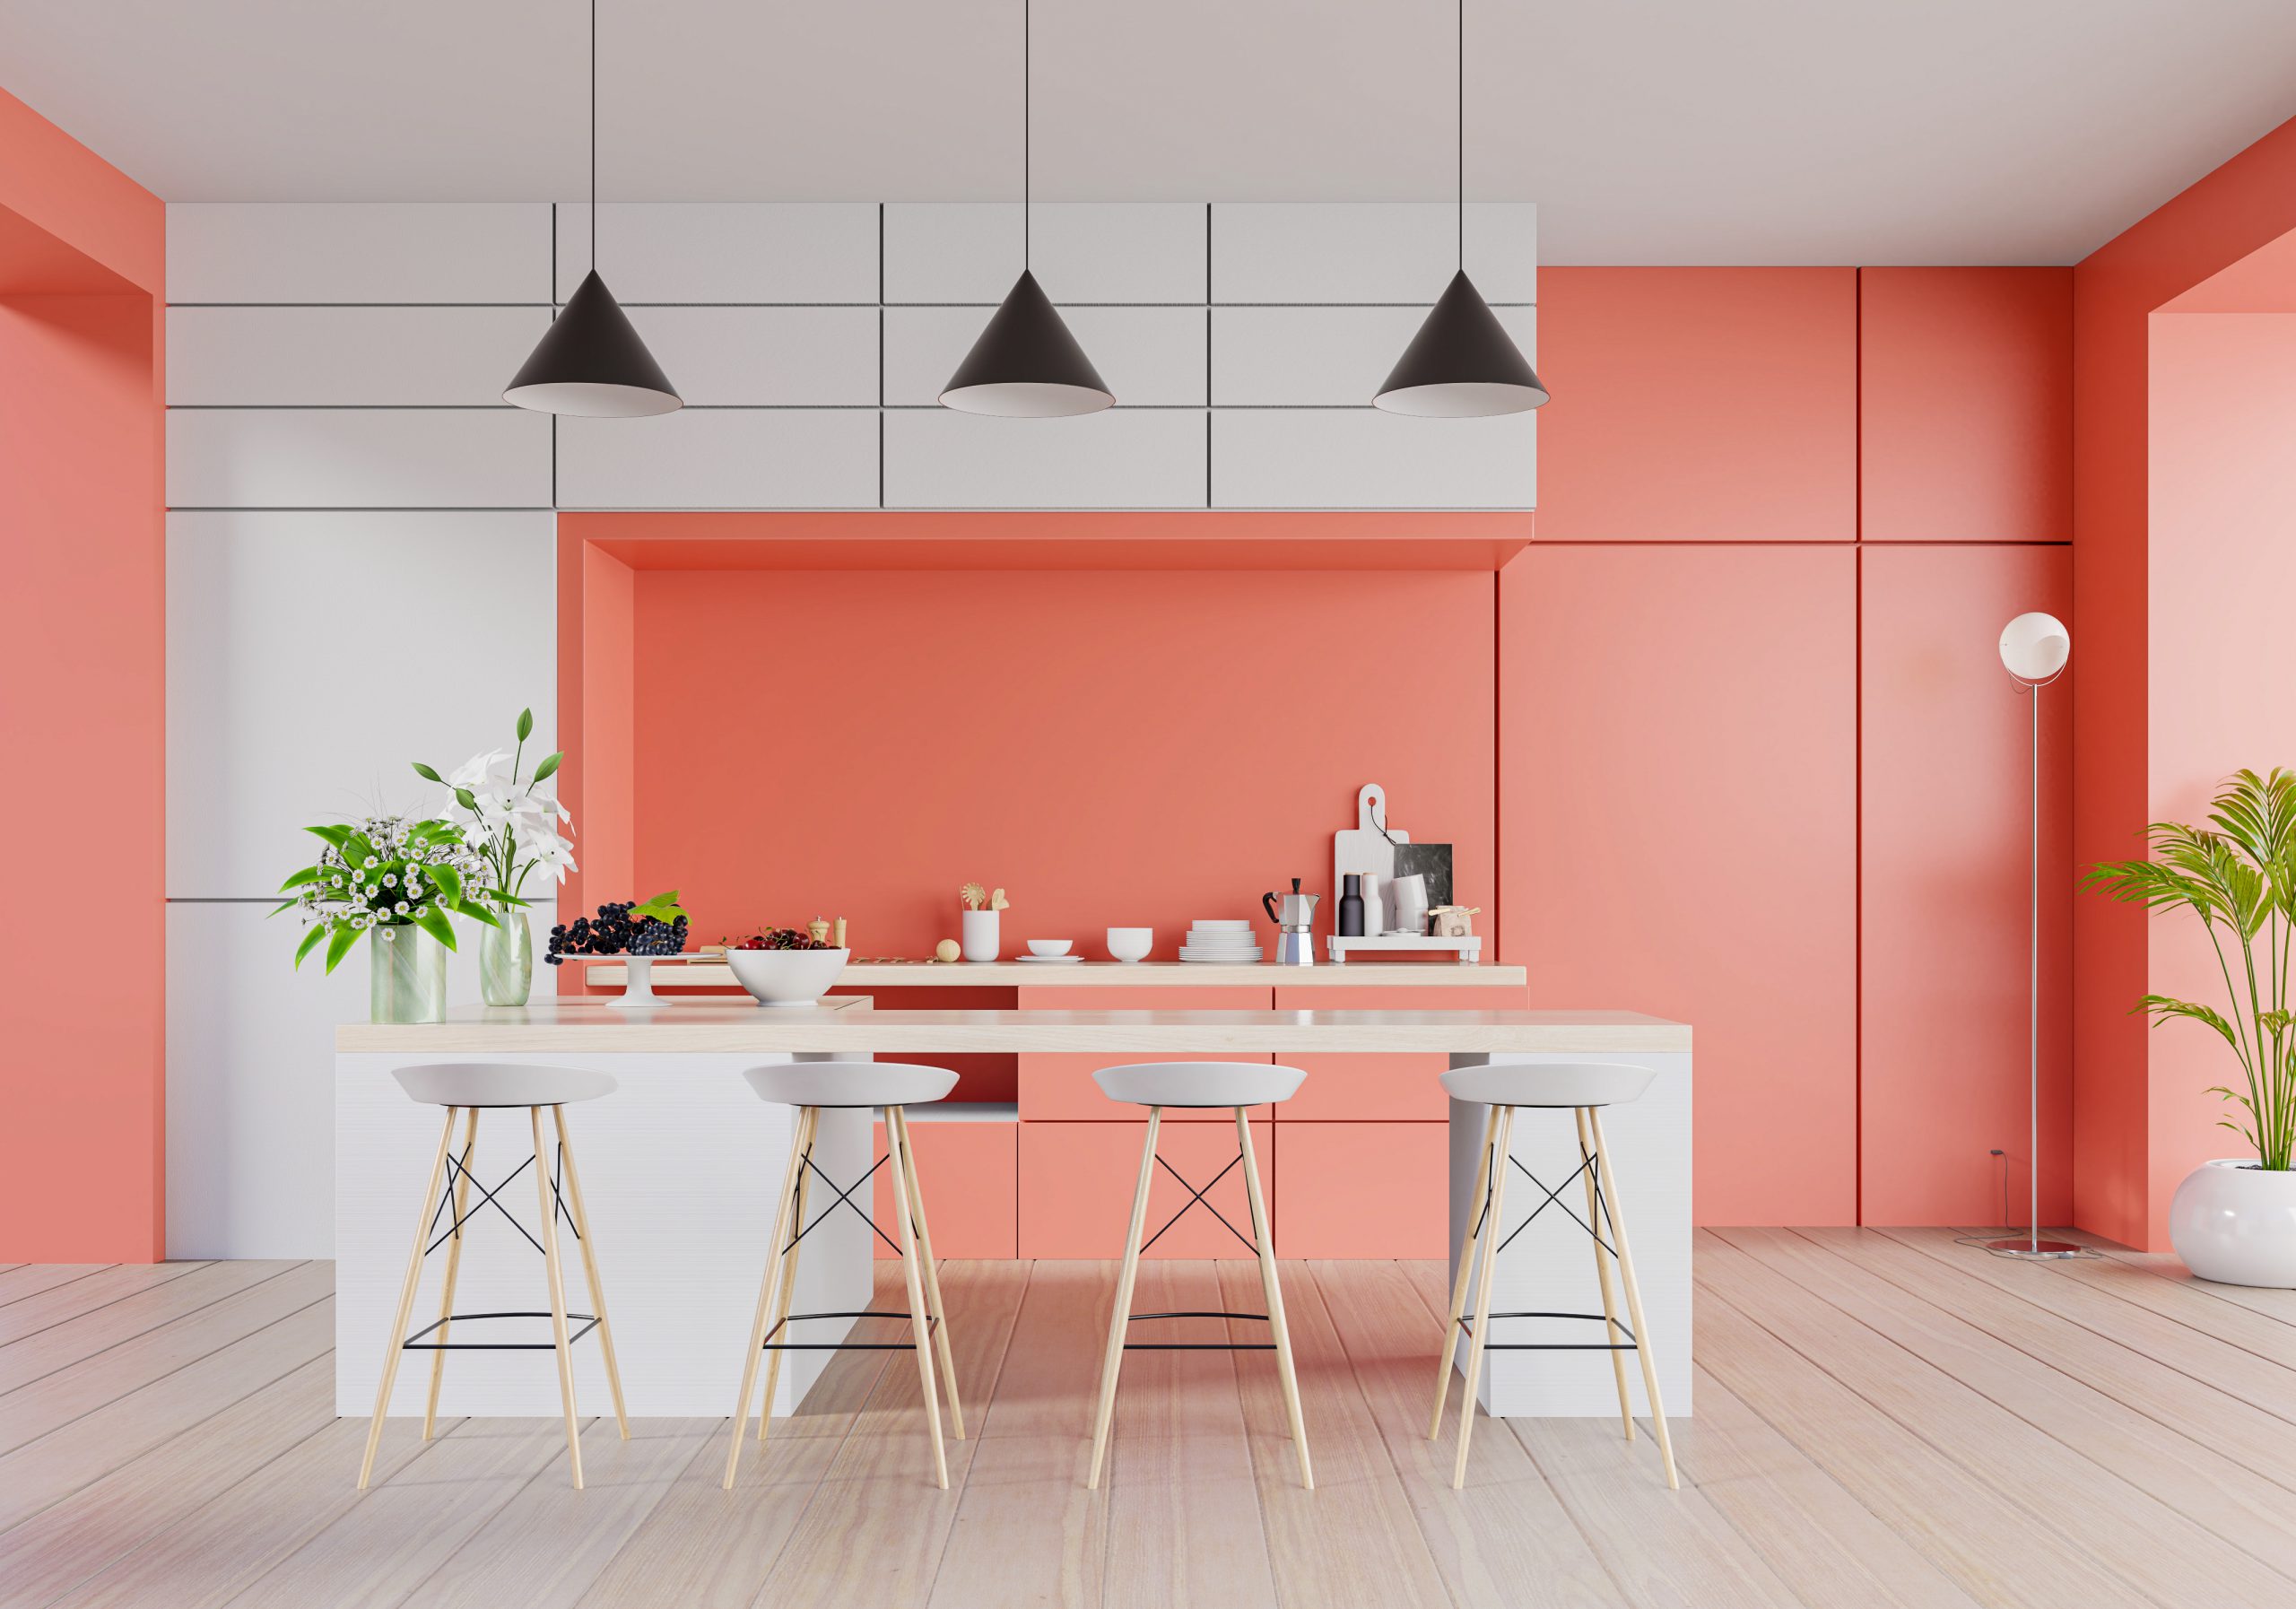 Kitchen Interior With Living Coral Color Wall On Living Coral Color.